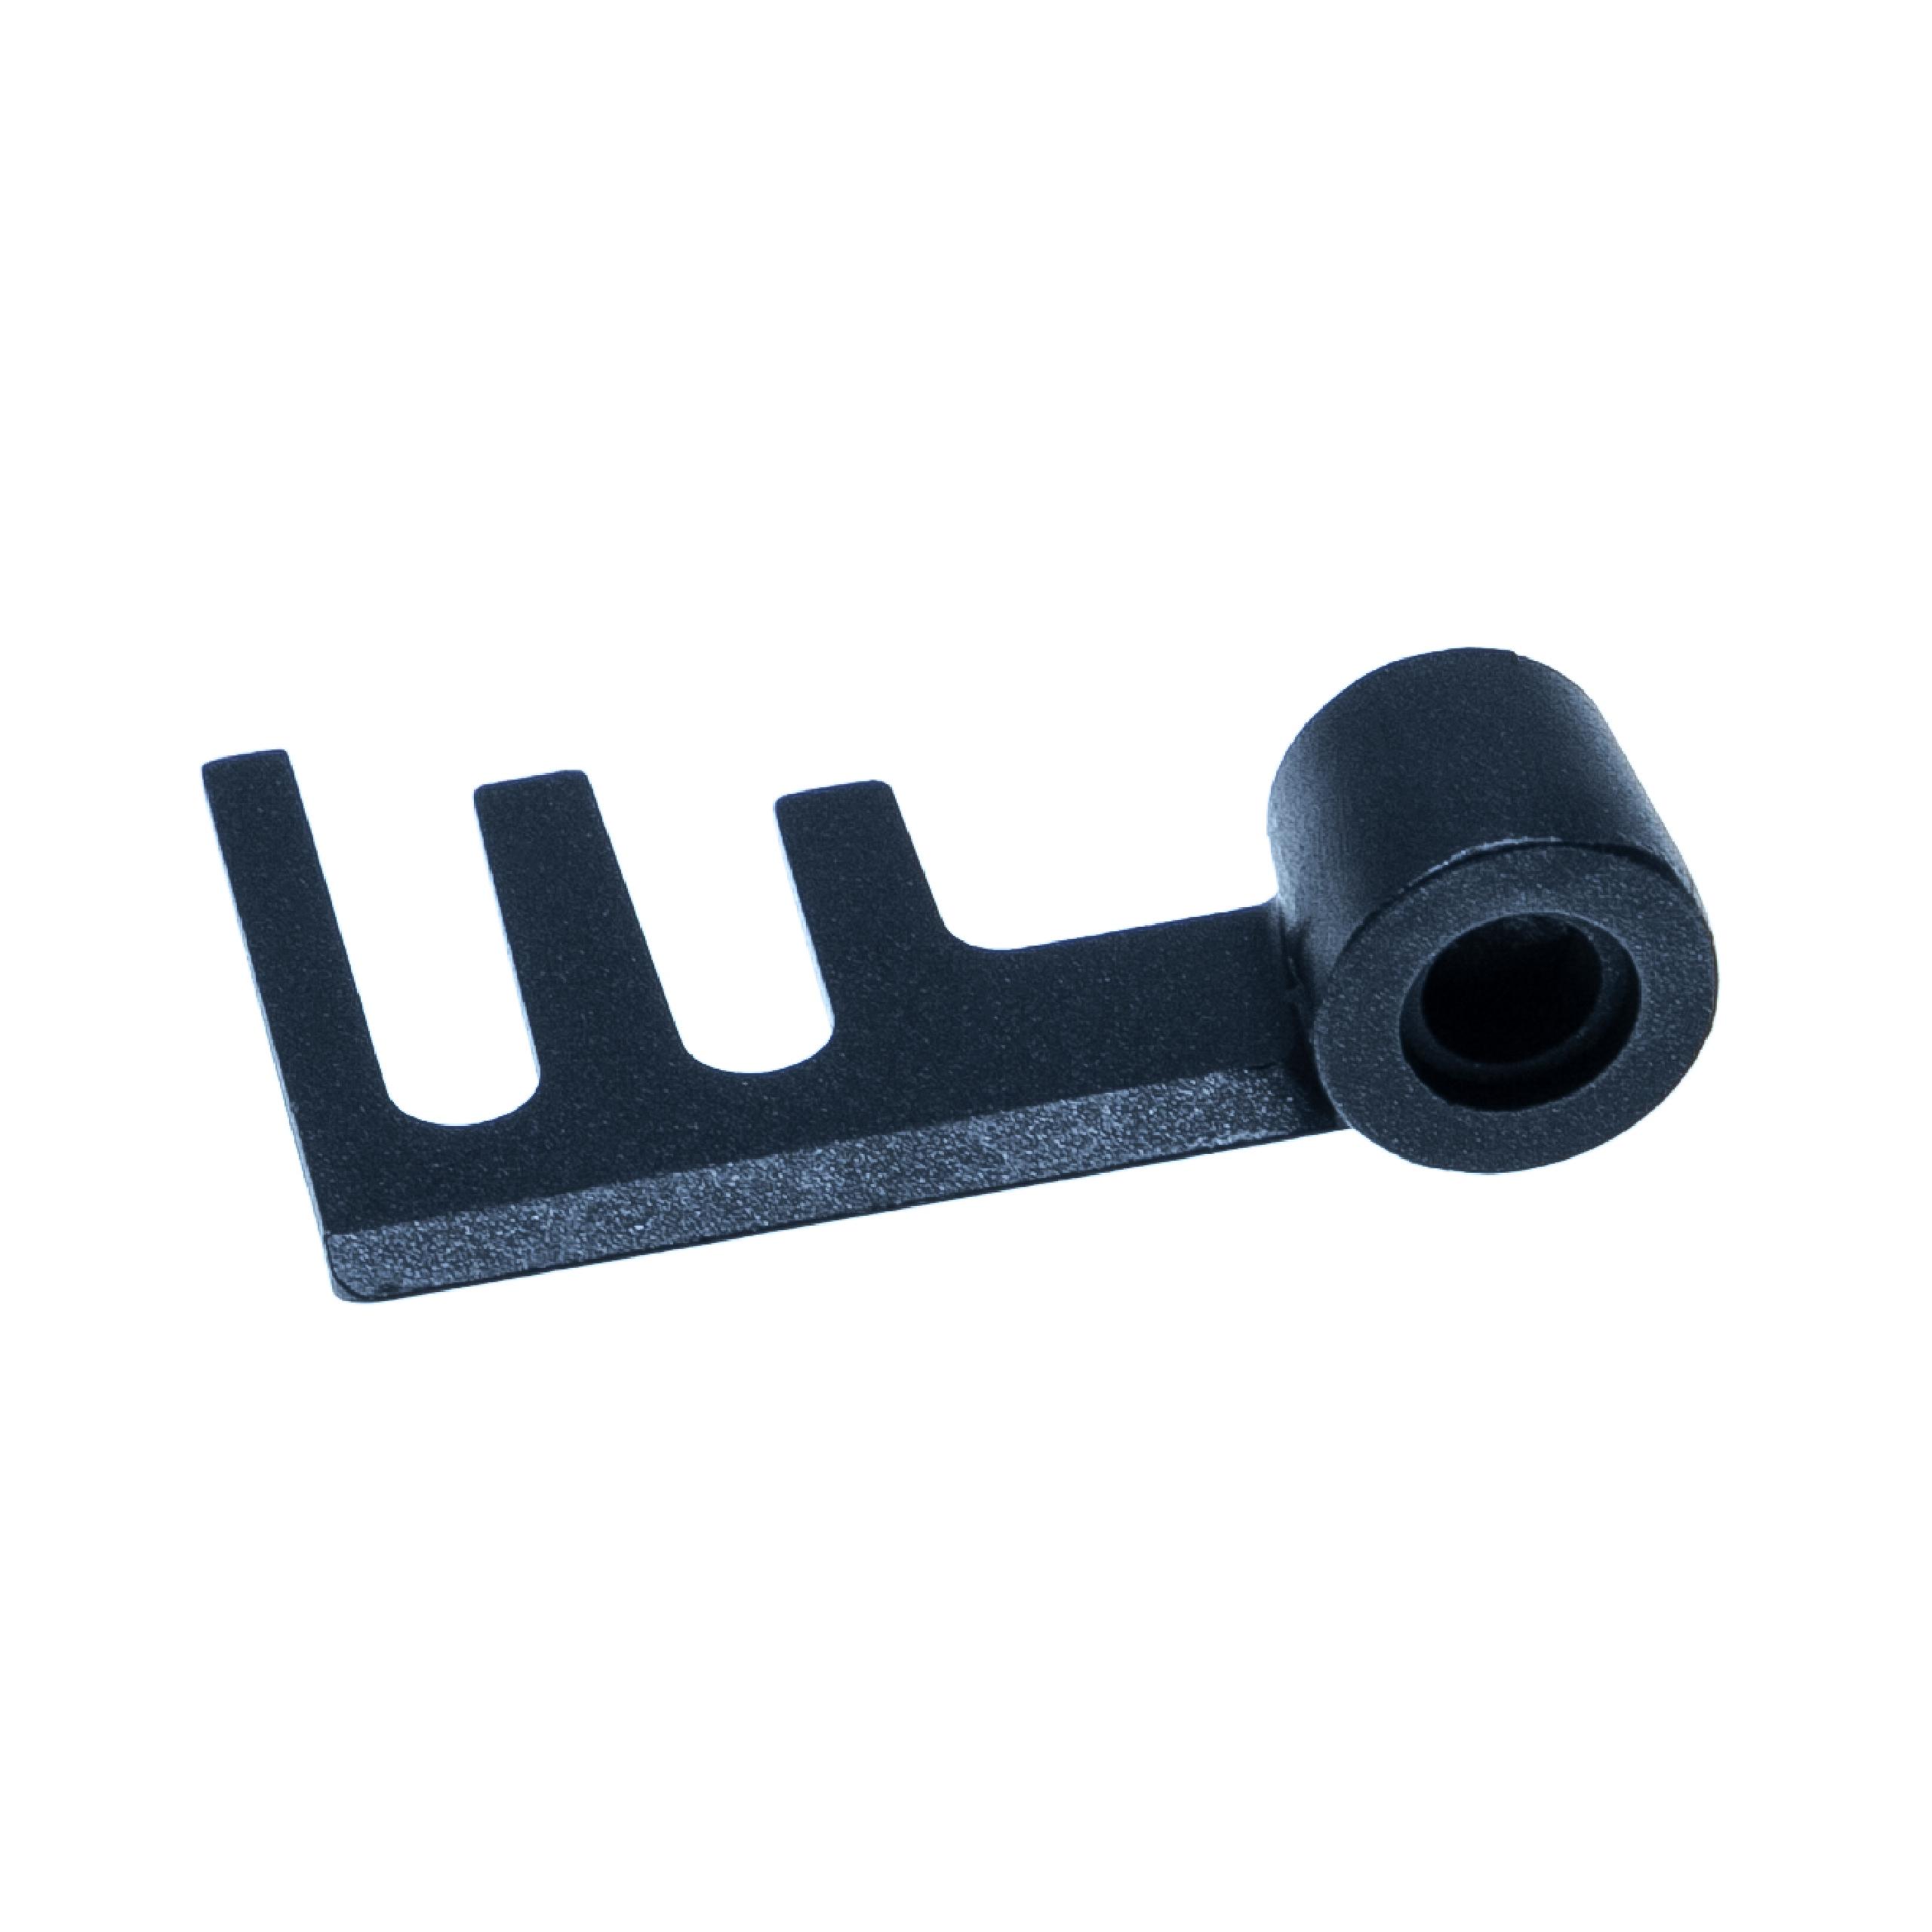 Dough Hook Replacement for ADD96A1054, ADD97G160 for Bread-Maker - Mixing Paddle, black